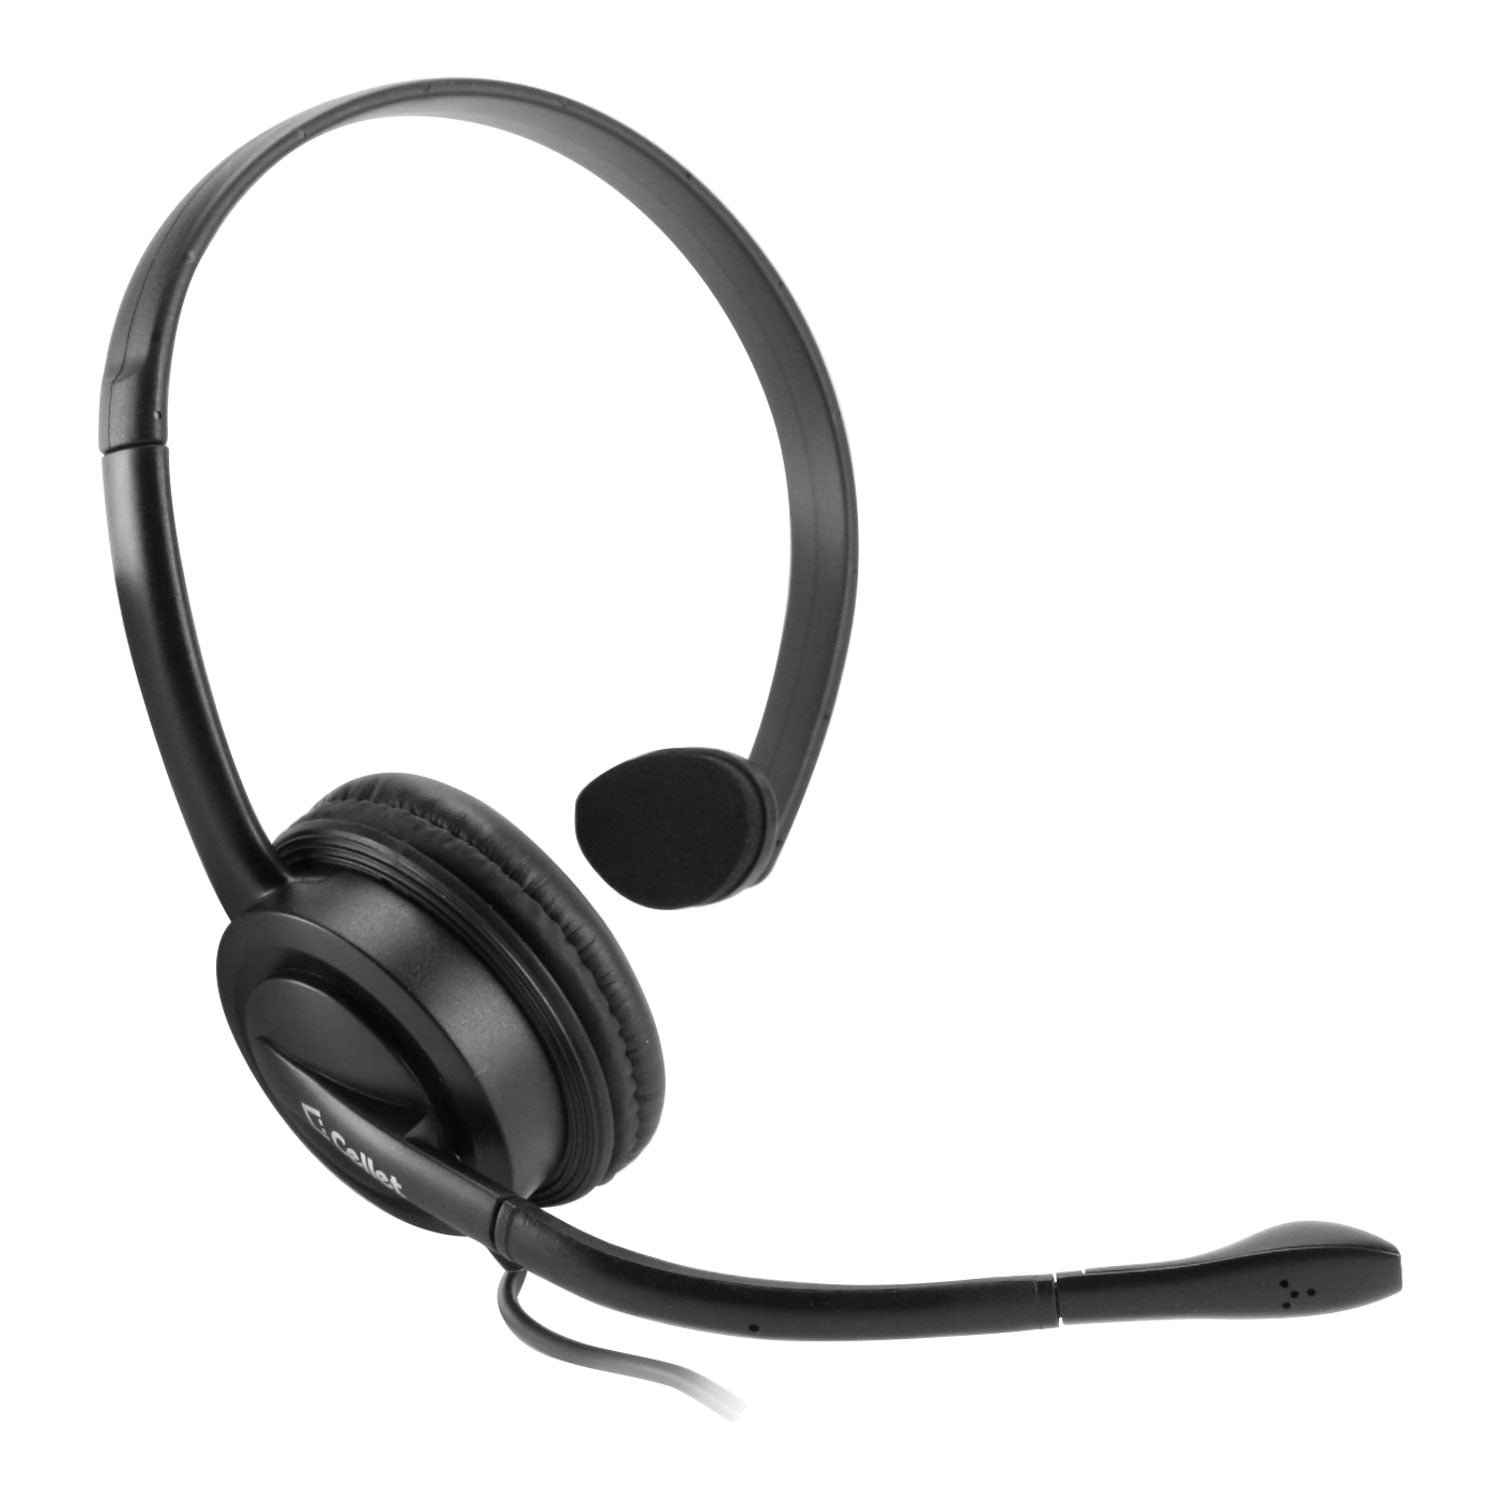 Call Center Office Hands-free Telephone 3.5mm Headset Monaural Microphone 